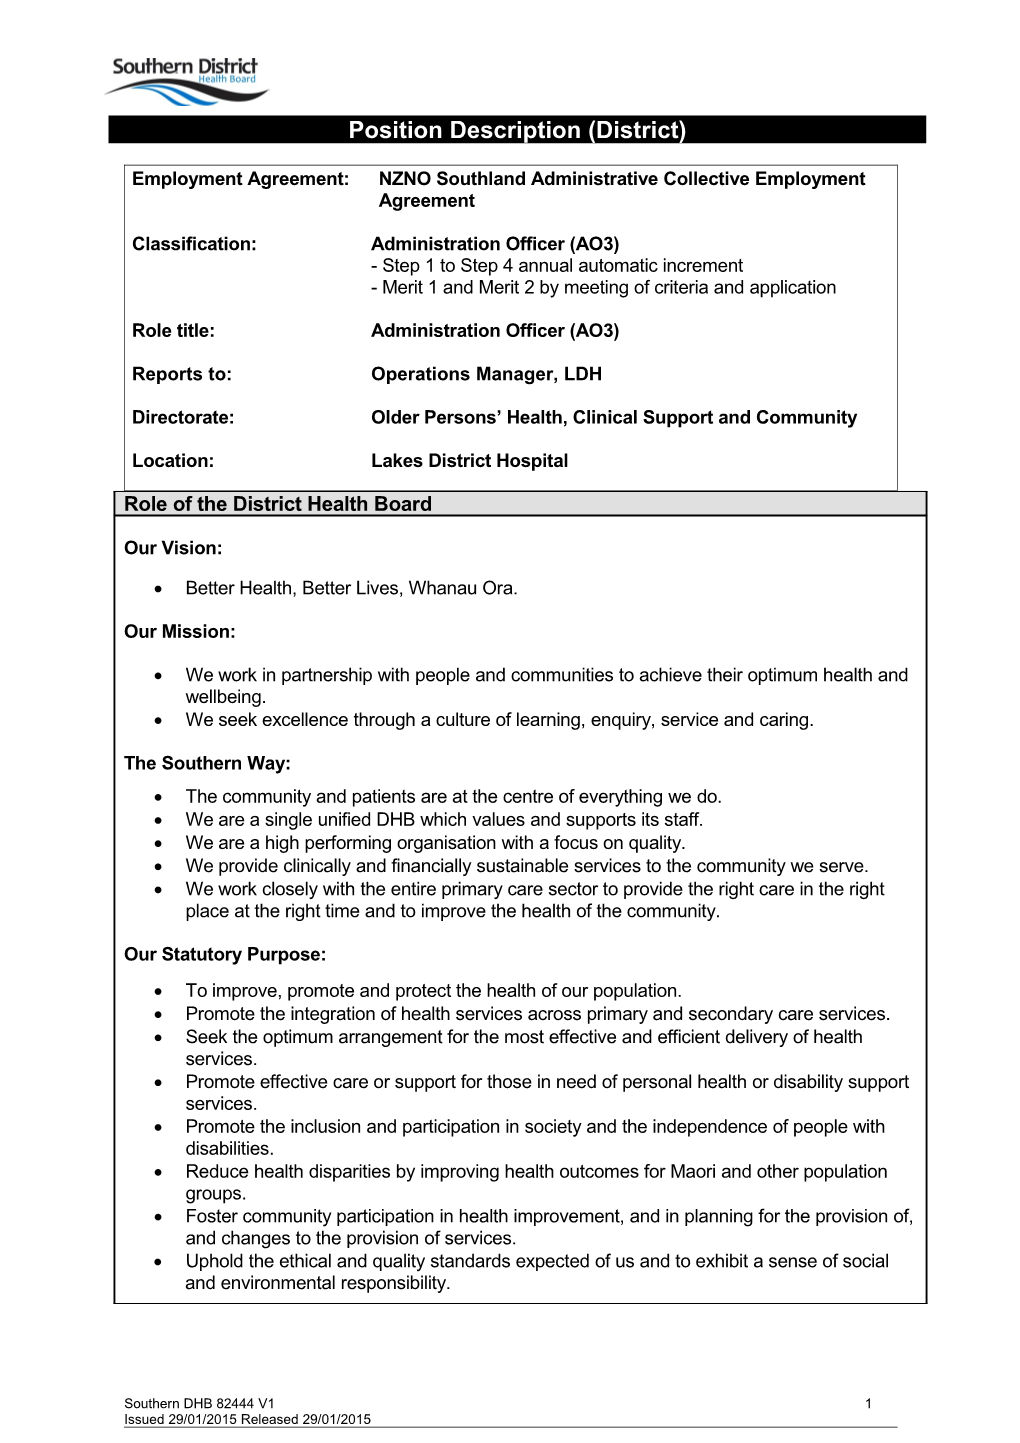 Employment Agreement:NZNO Southland Administrative Collective Employment Agreement